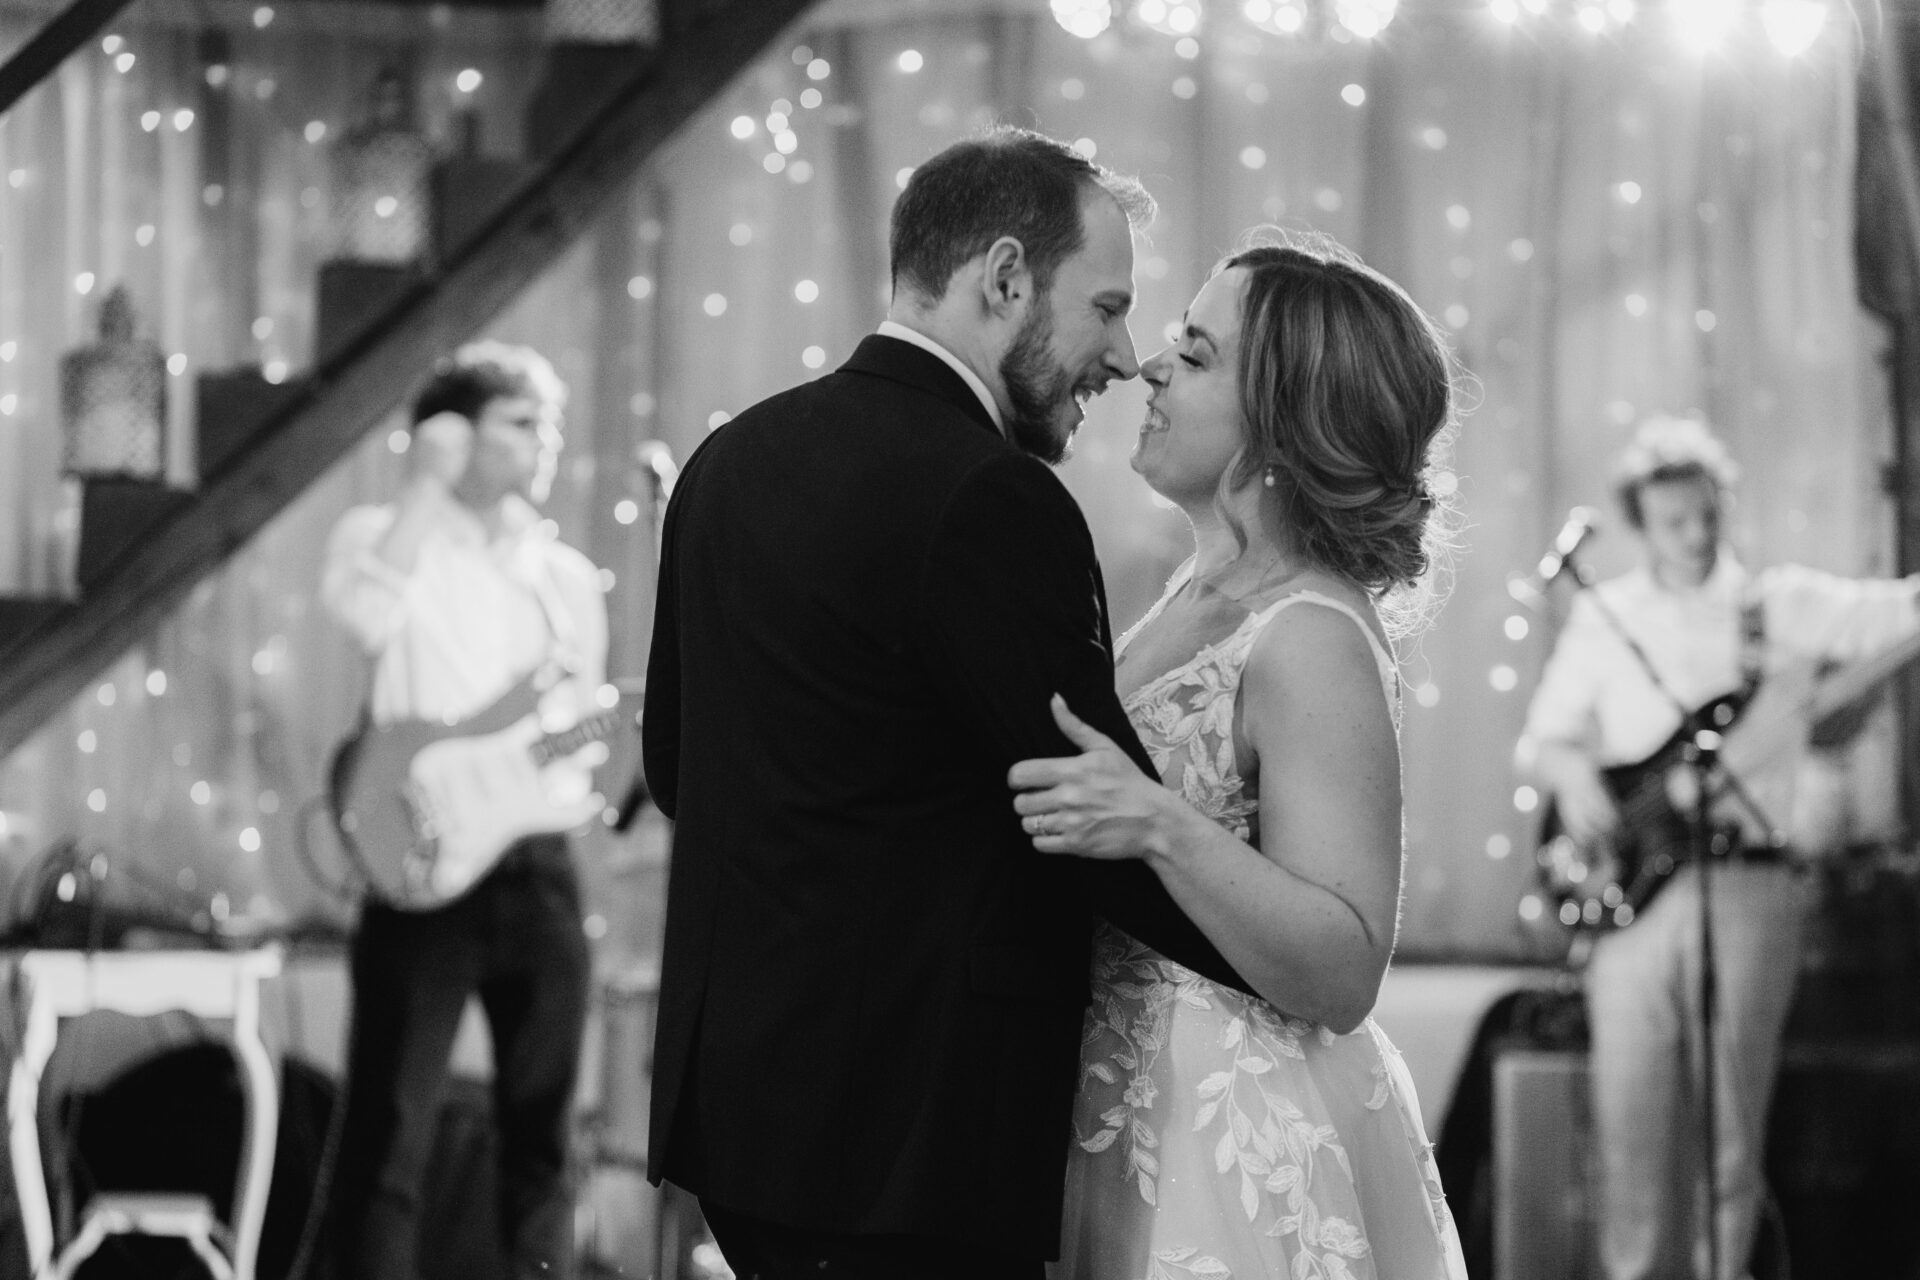 The first dance at Old Luxters Barn wedding venue in Oxfordshire